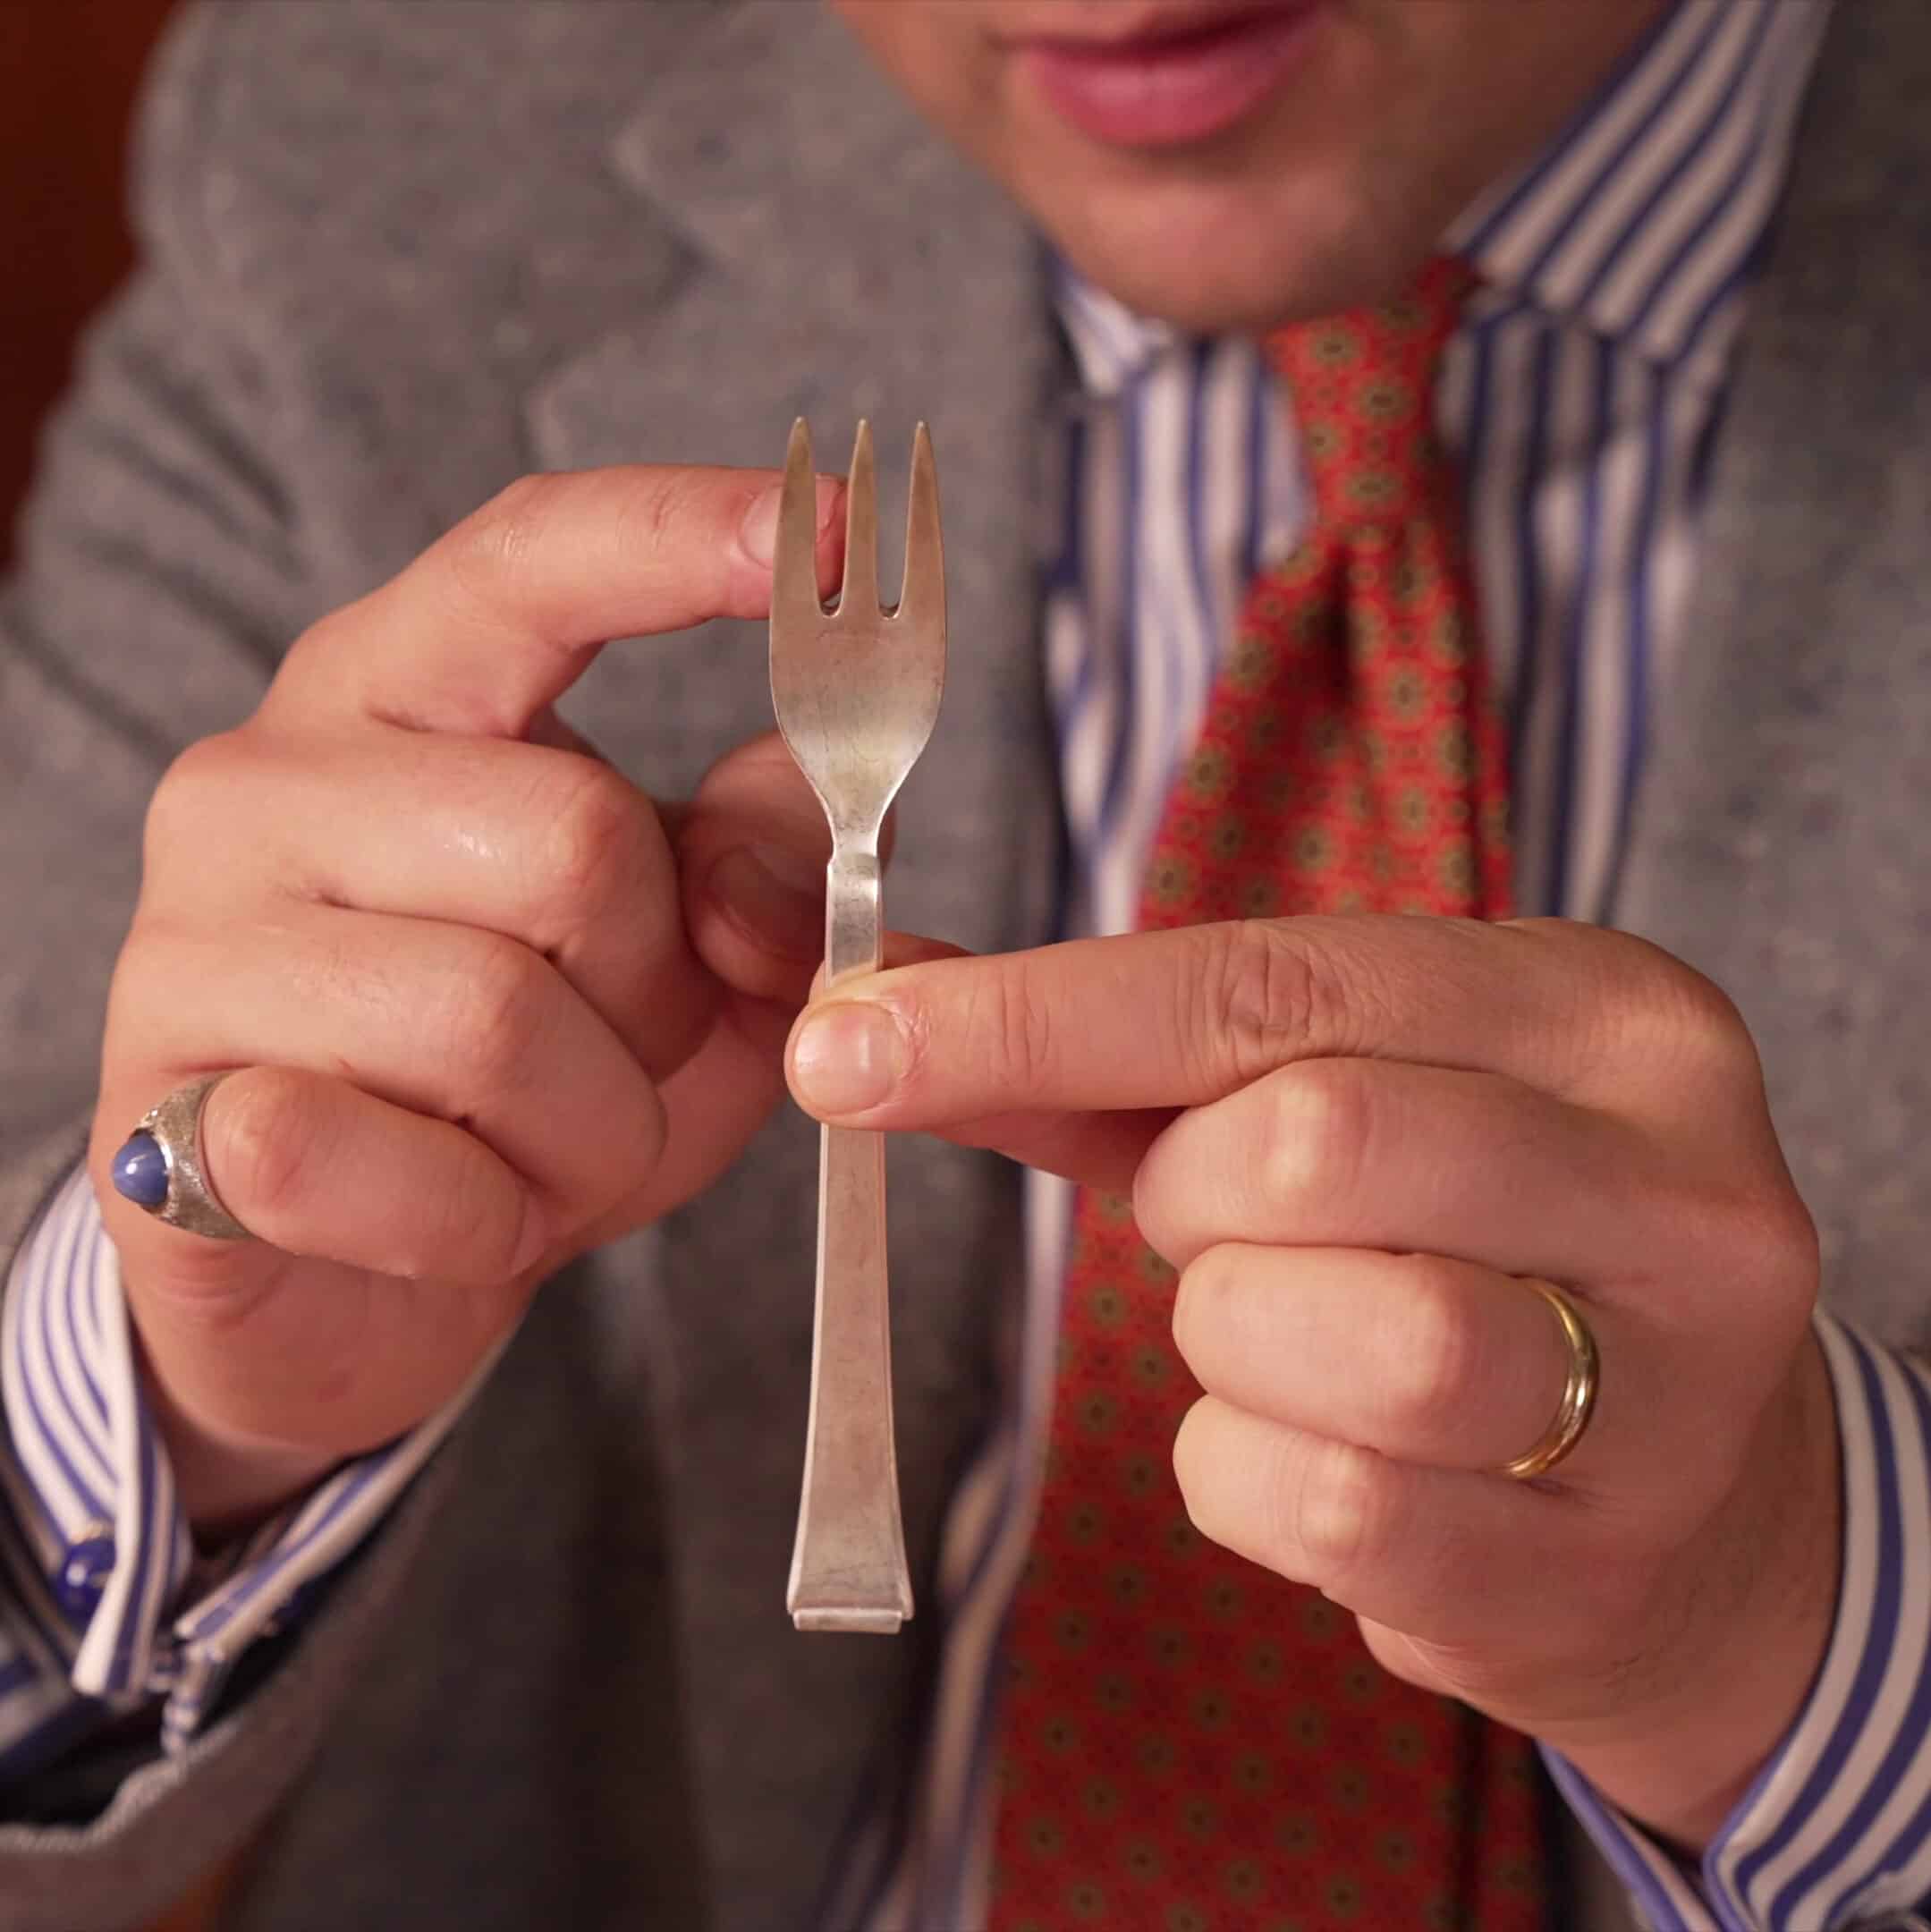 A special fork designed for pastry desserts.